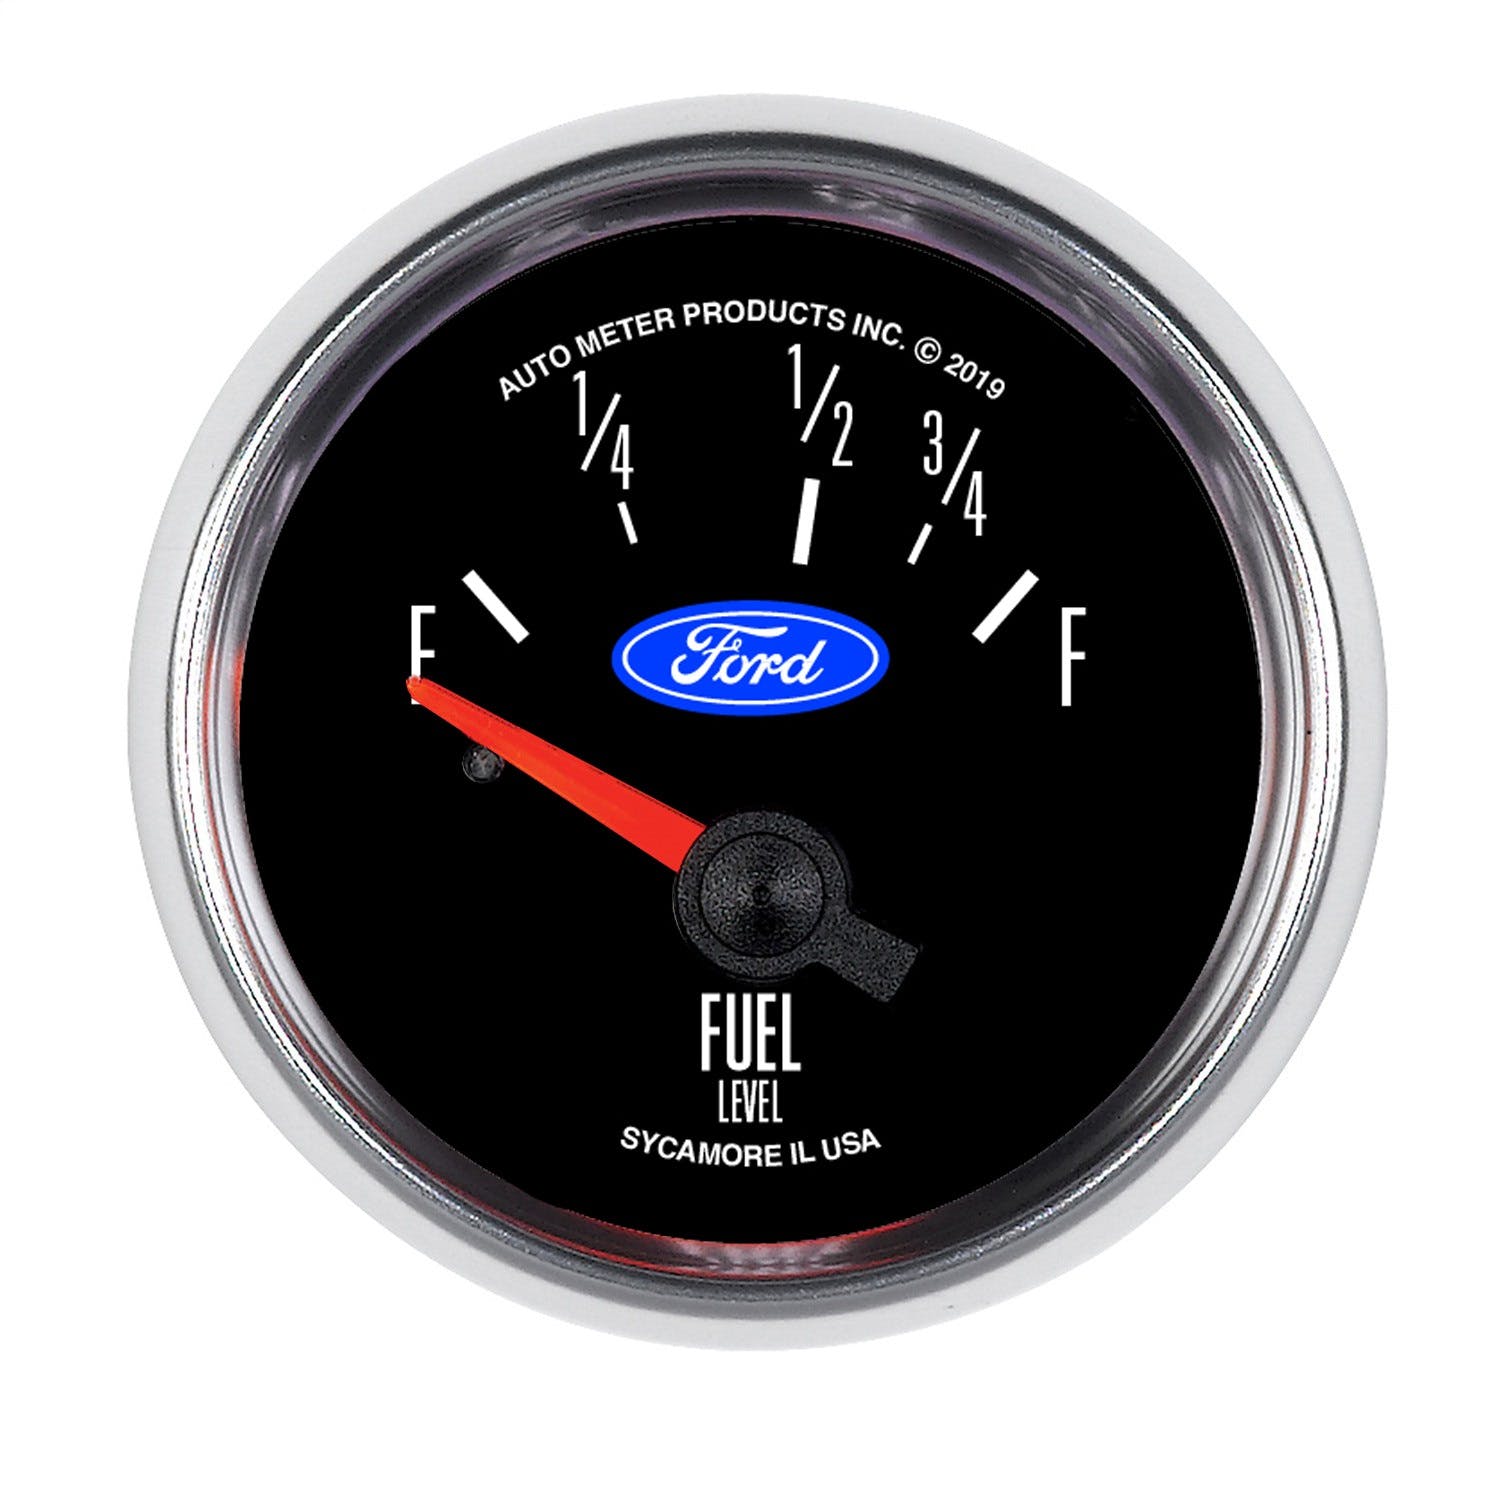 AutoMeter Products 880821 Oil Pressure Gauge, 2 1/16, 100PSI, Electric, Ford